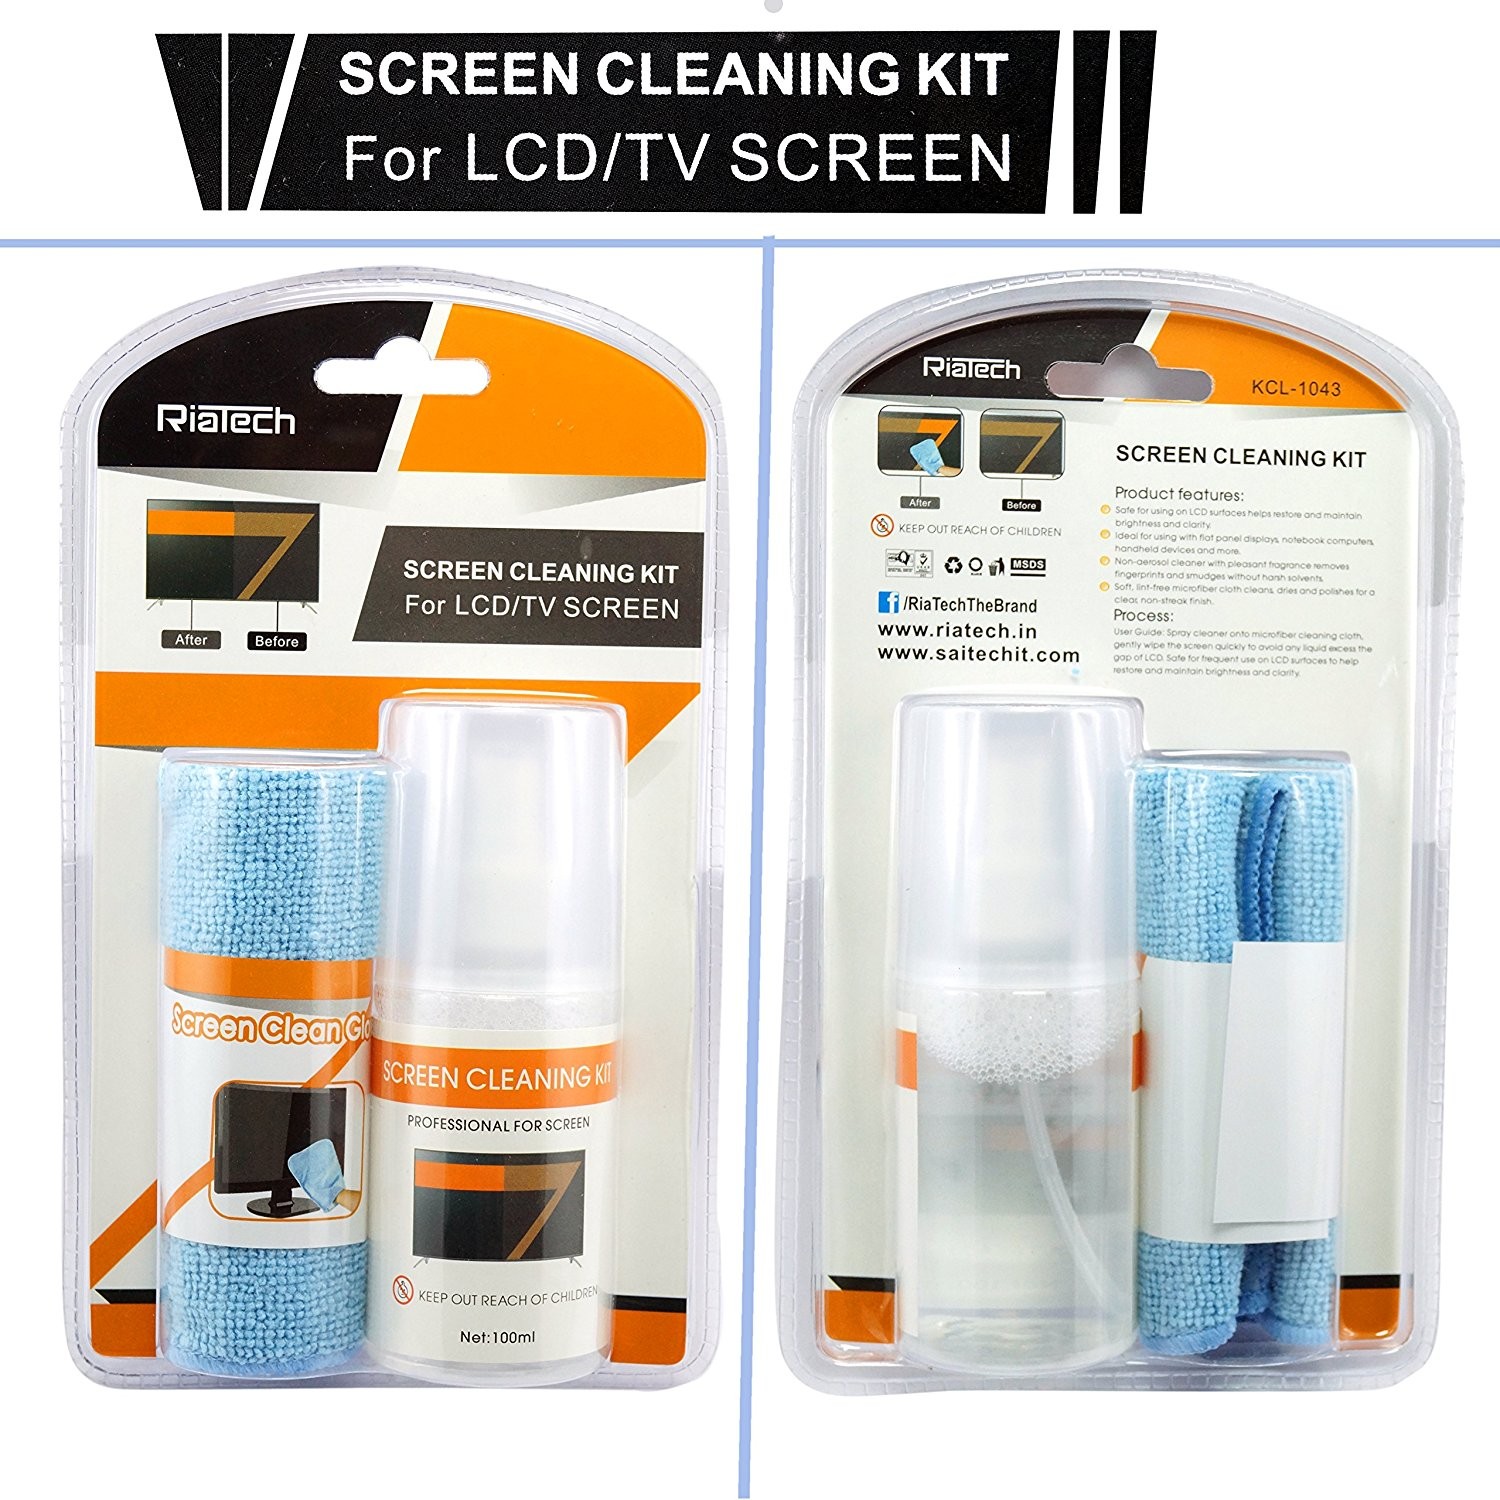 RiaTech® Screen Cleaner Kit - Best for LED & LCD TV, Computer Monitor, Laptop, and iPad Screens (KCL 1043)